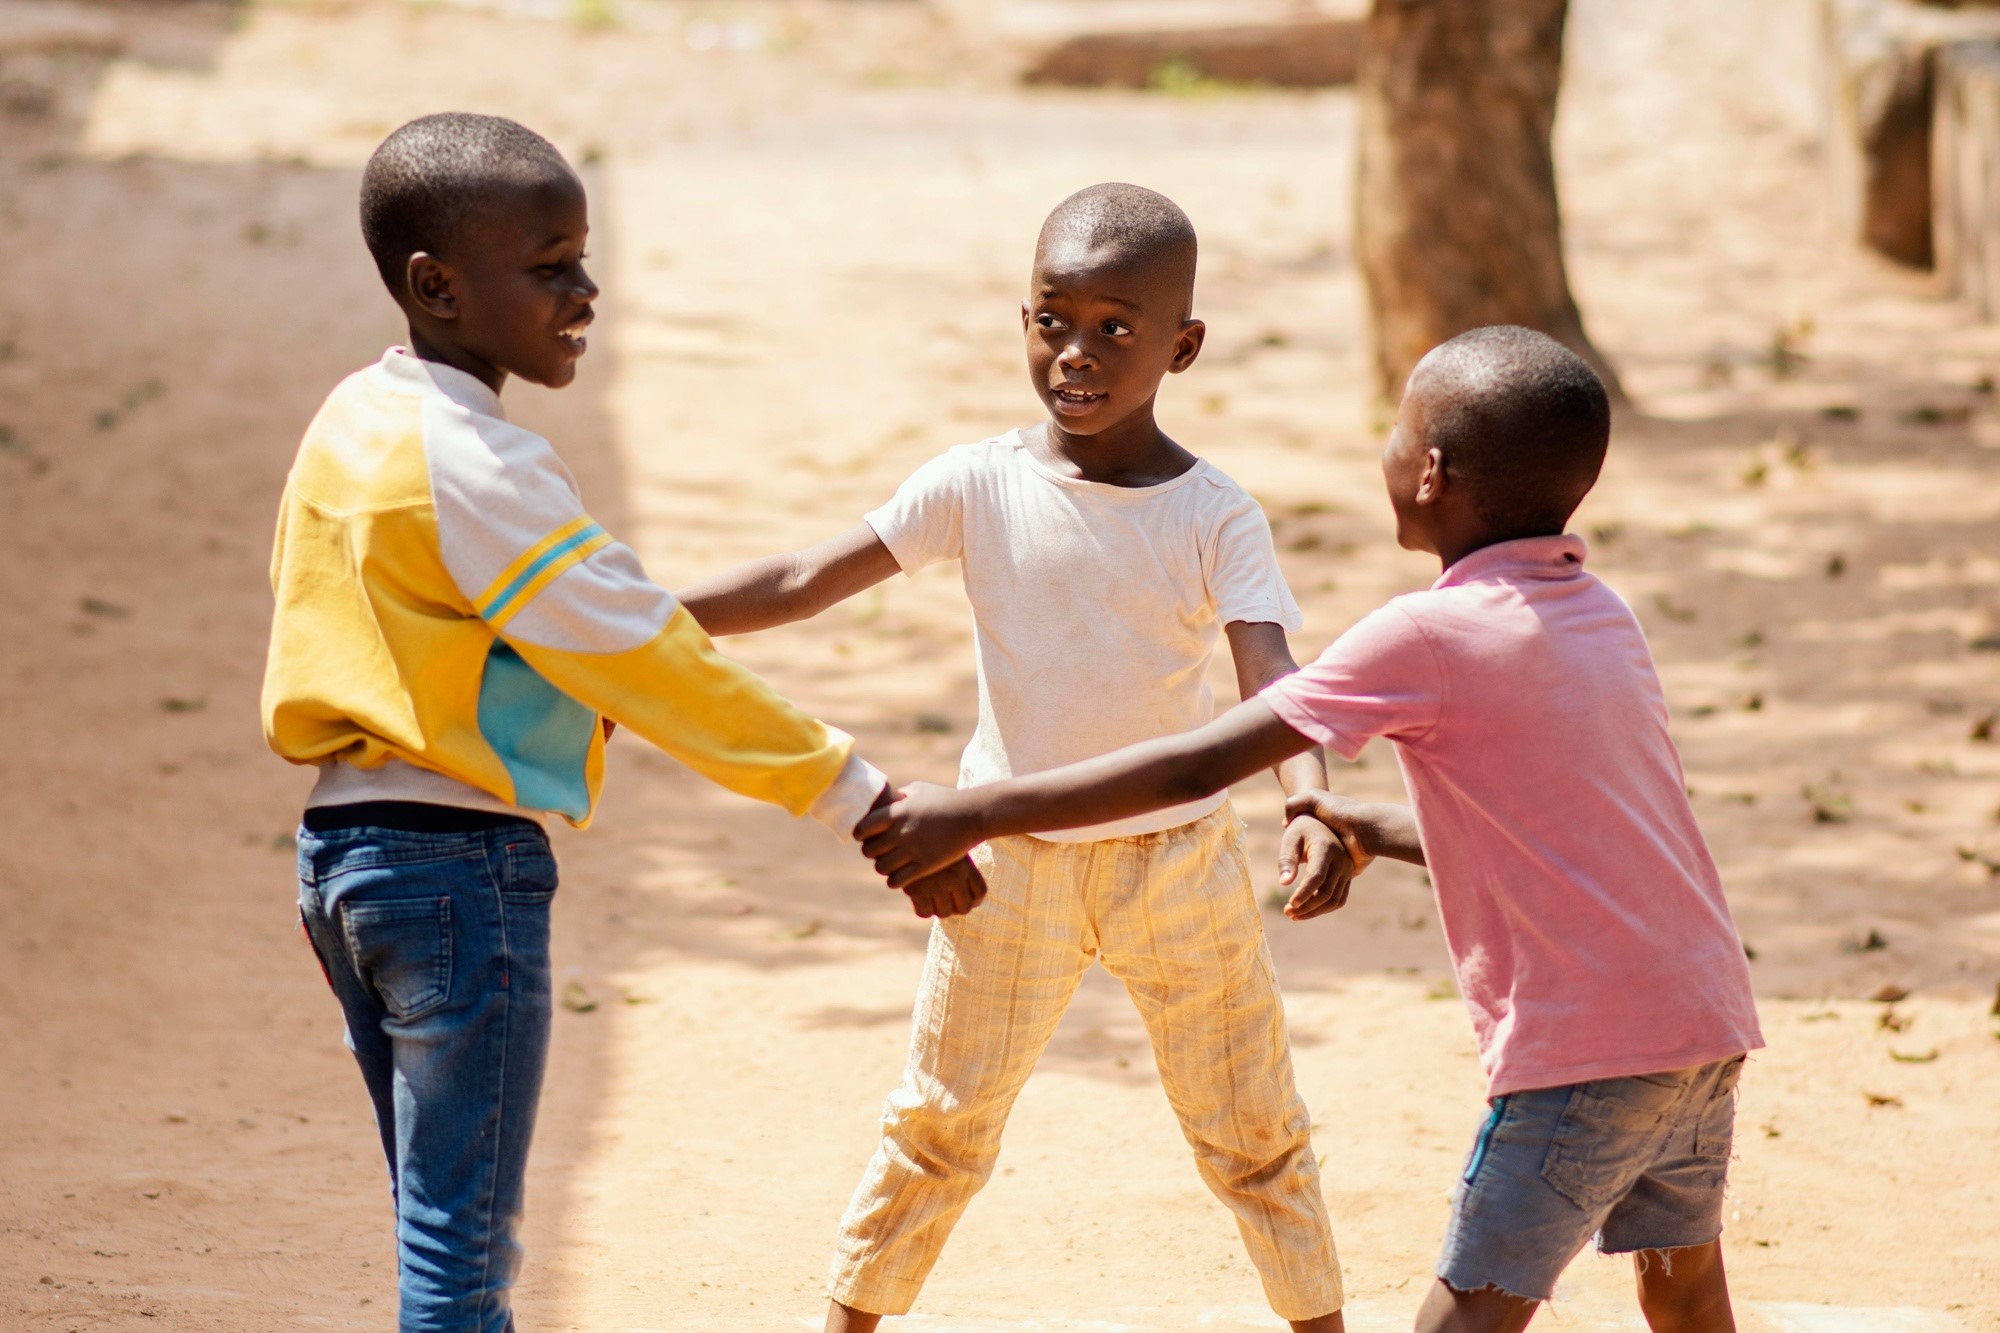 African boys playing outdoors